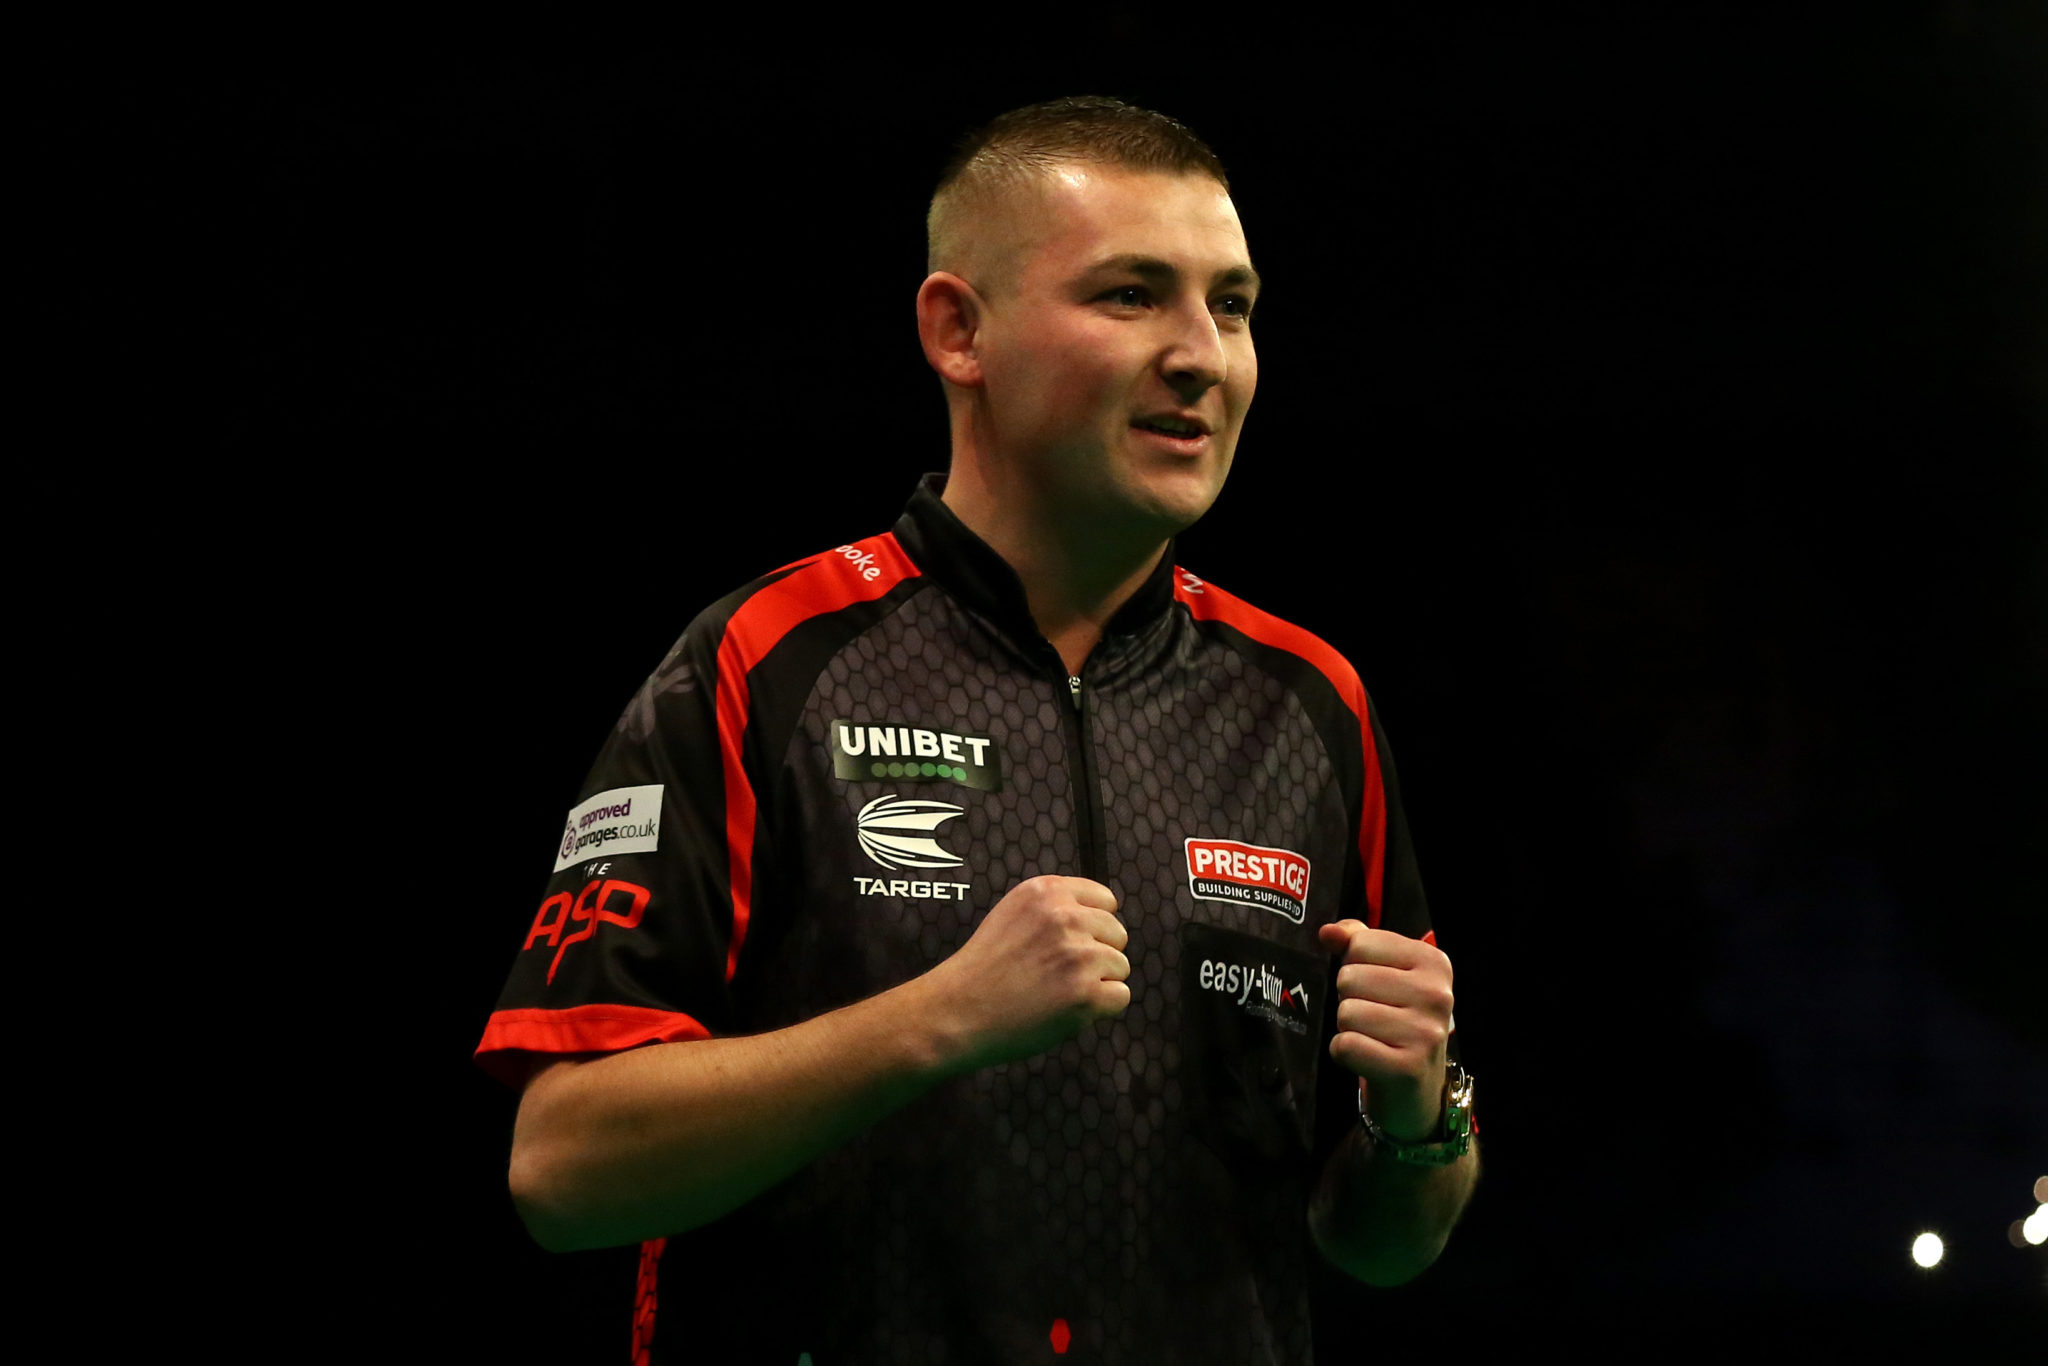 LIVERPOOL, ENGLAND - MARCH 12: Nathan Aspinall celebrates a draw in his match against Gary Anderson during Night Six of the Premier League Darts at the M&S Bank Arena on March 12, 2020 in Liverpool, England. (Photo by Lewis Storey/Getty Images)